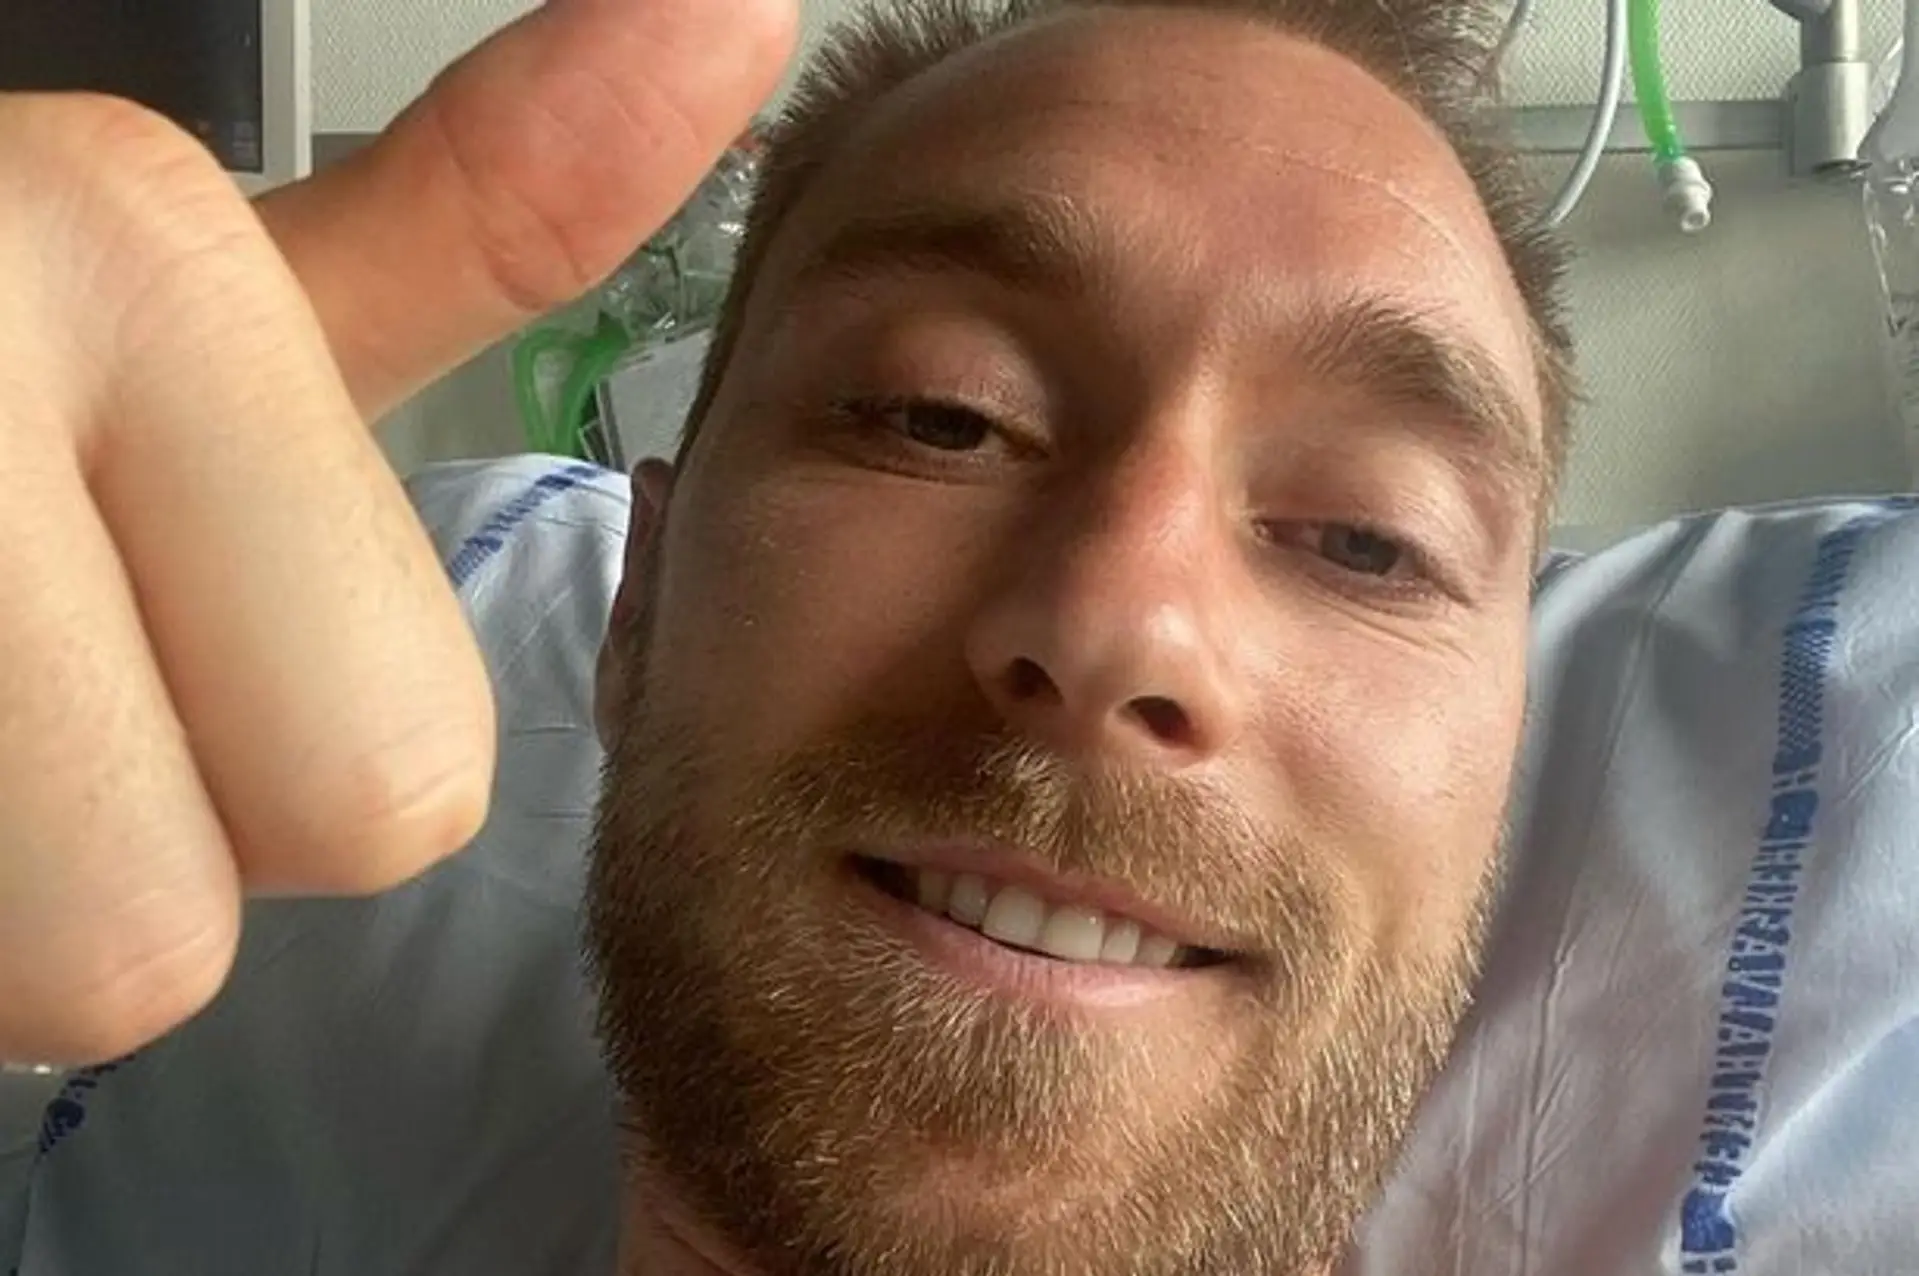 Christian Eriksen to don Denmark kit as he watches Belgium clash from hospital